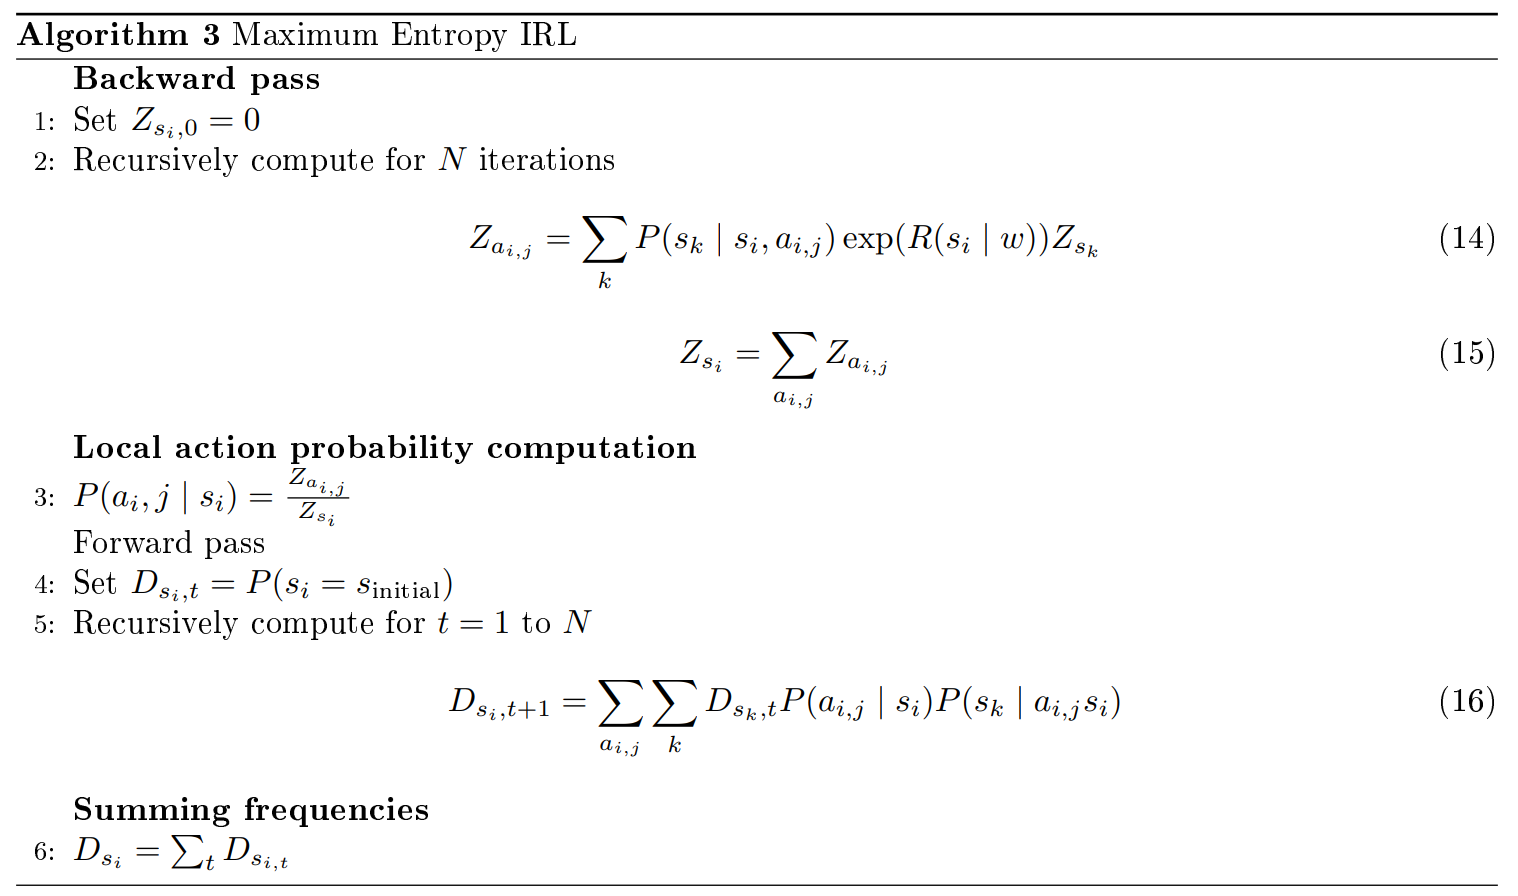 docs/stanford-cs234-notes-zh/img/fig7_alg_3.png